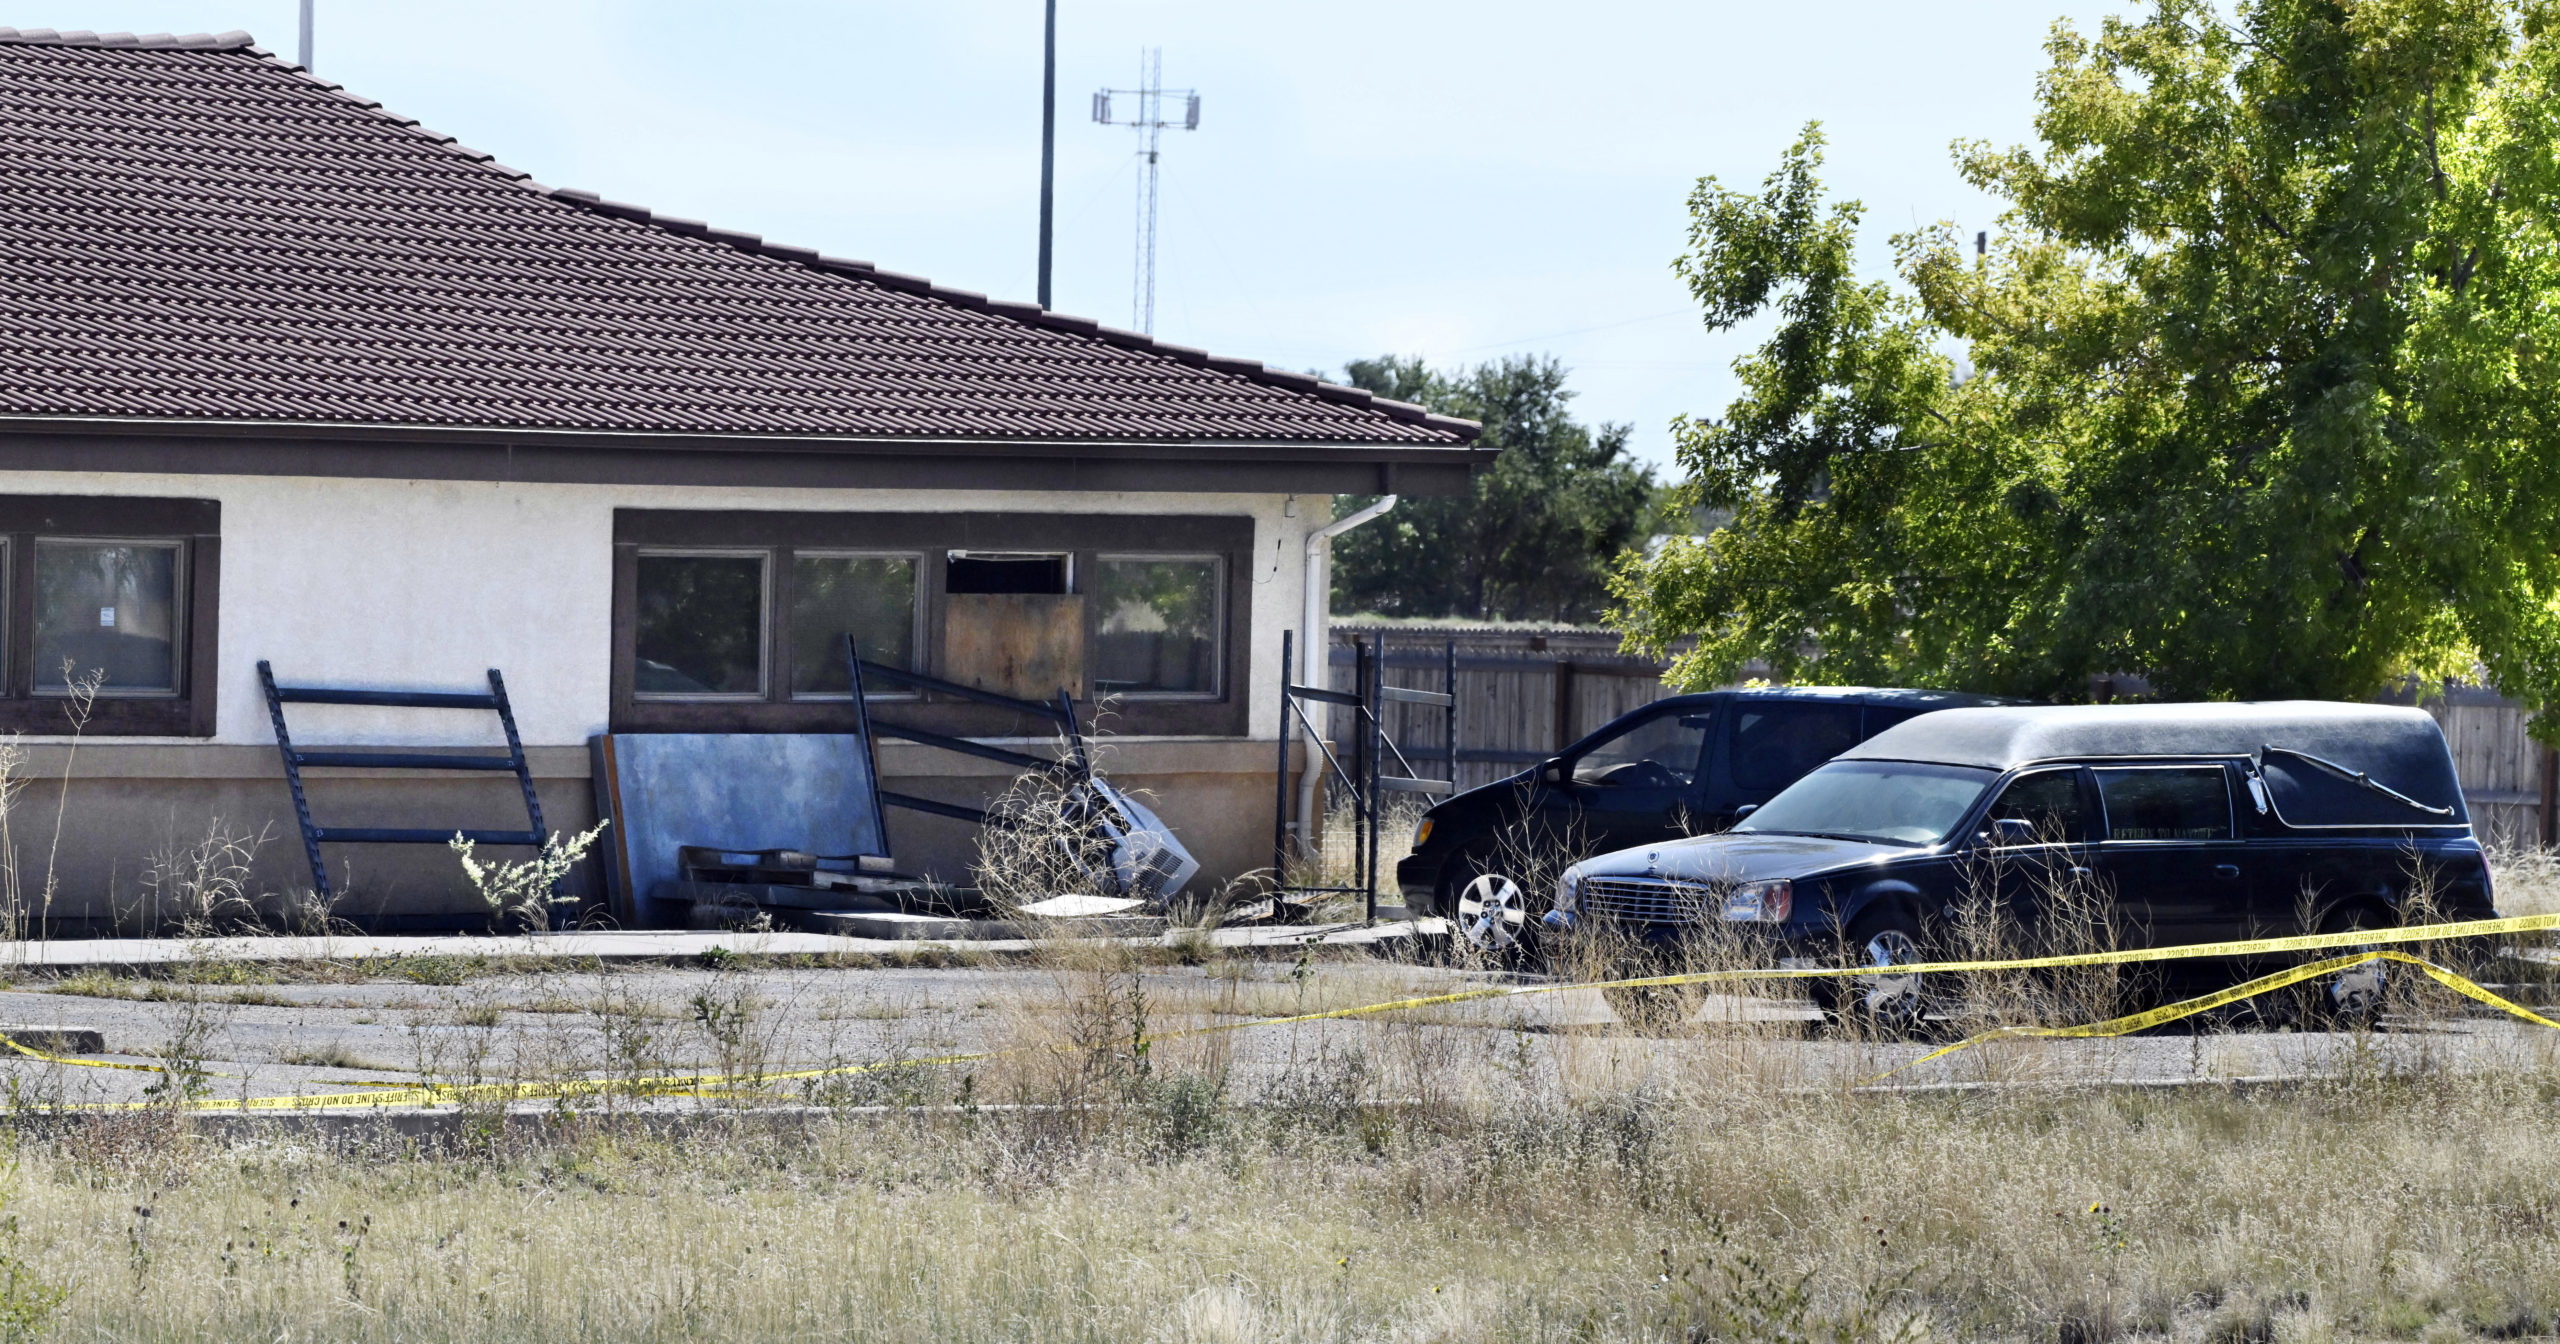 A hearse and debris can be seen at the rear of the Return to Nature Funeral Home in Penrose, Colorado, on Oct. 5.